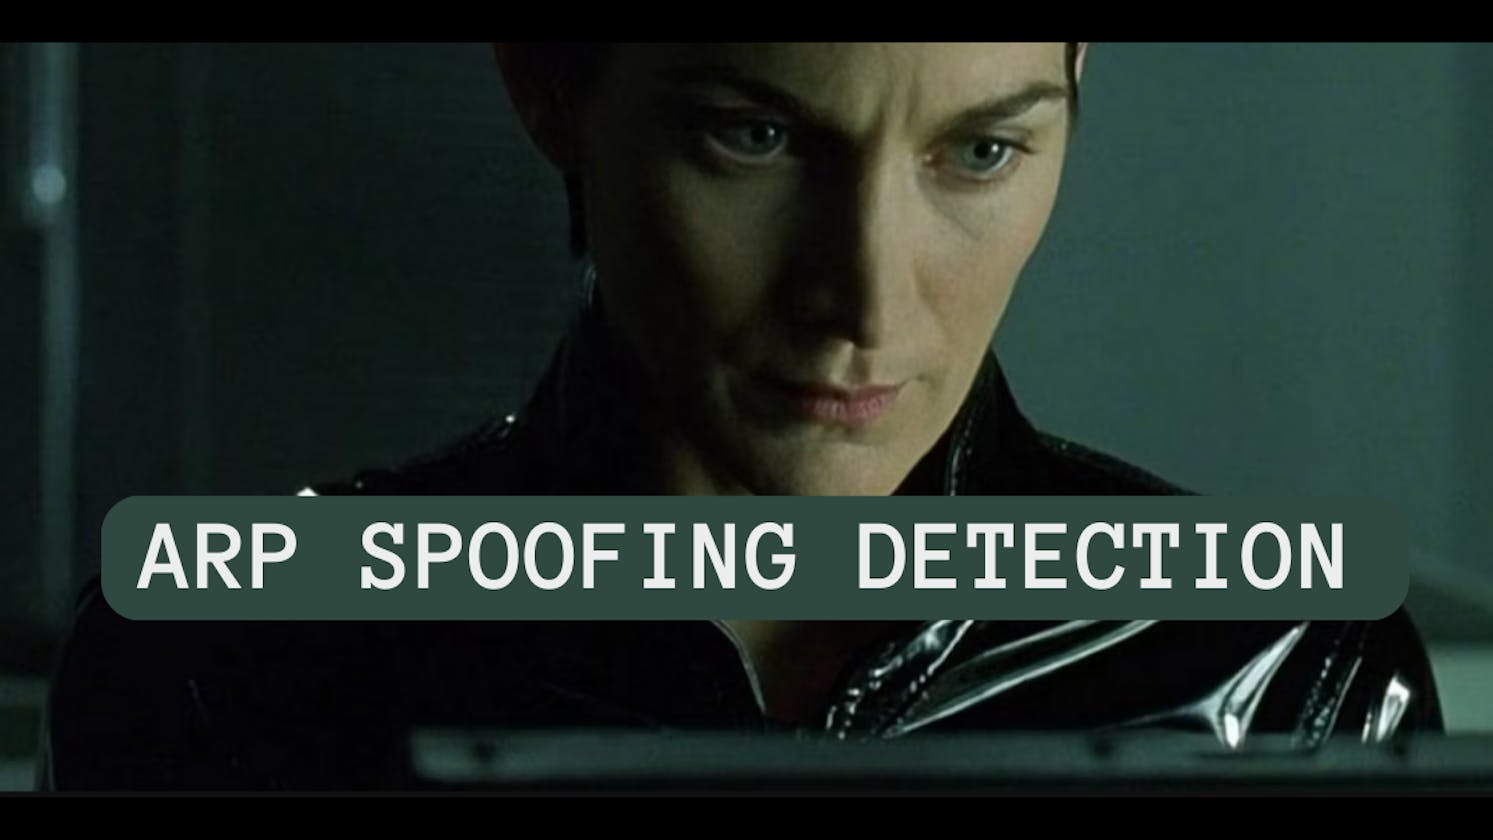 Detect ARP spoofing quickly & increase network security